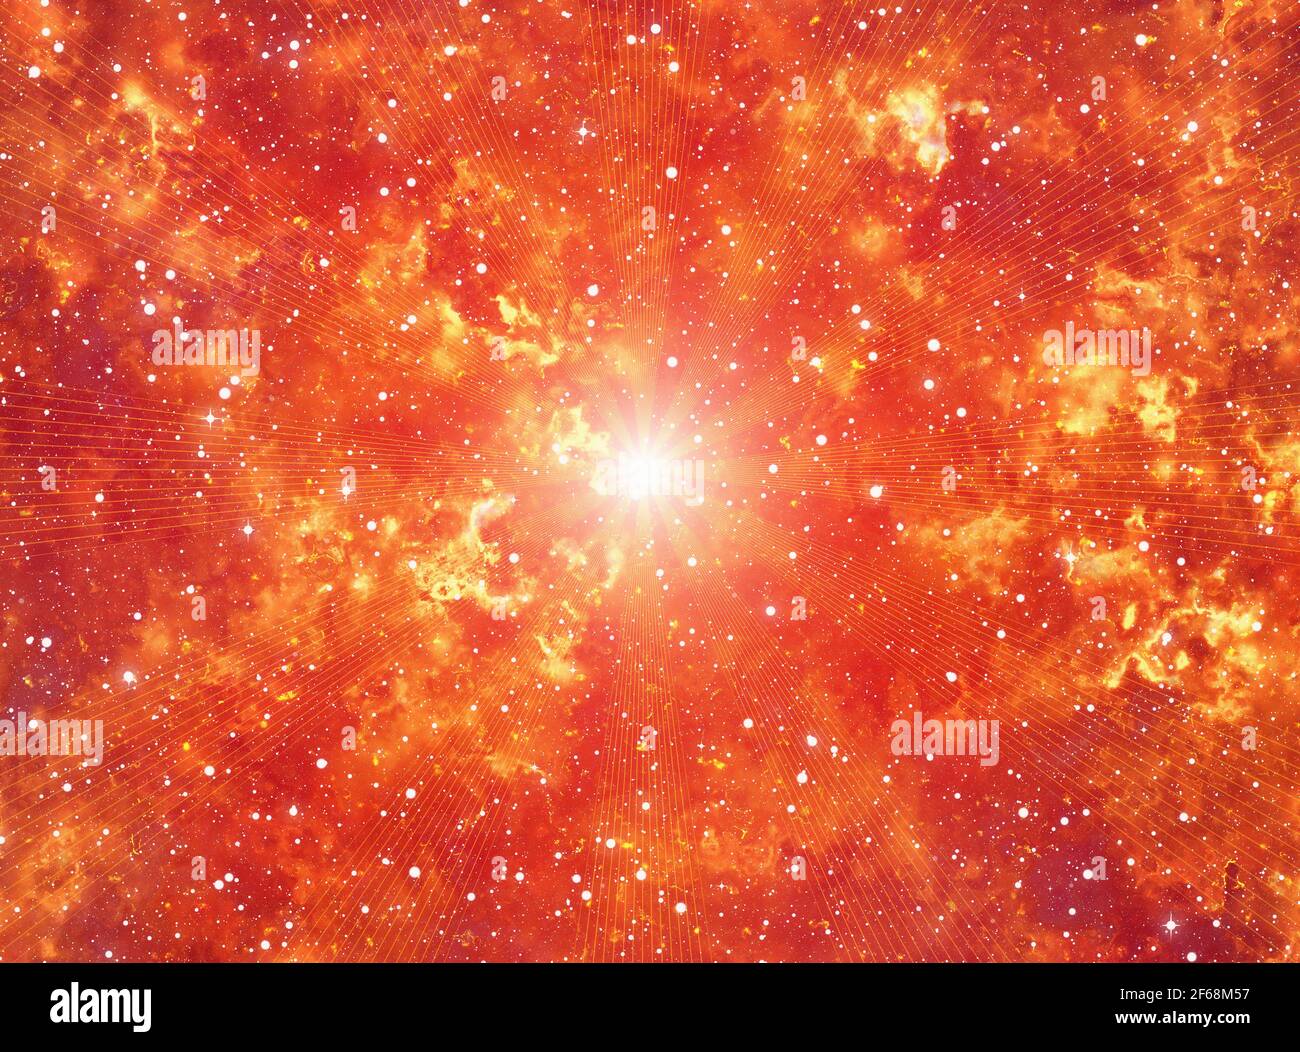 energy flash in space fire background Stock Photo